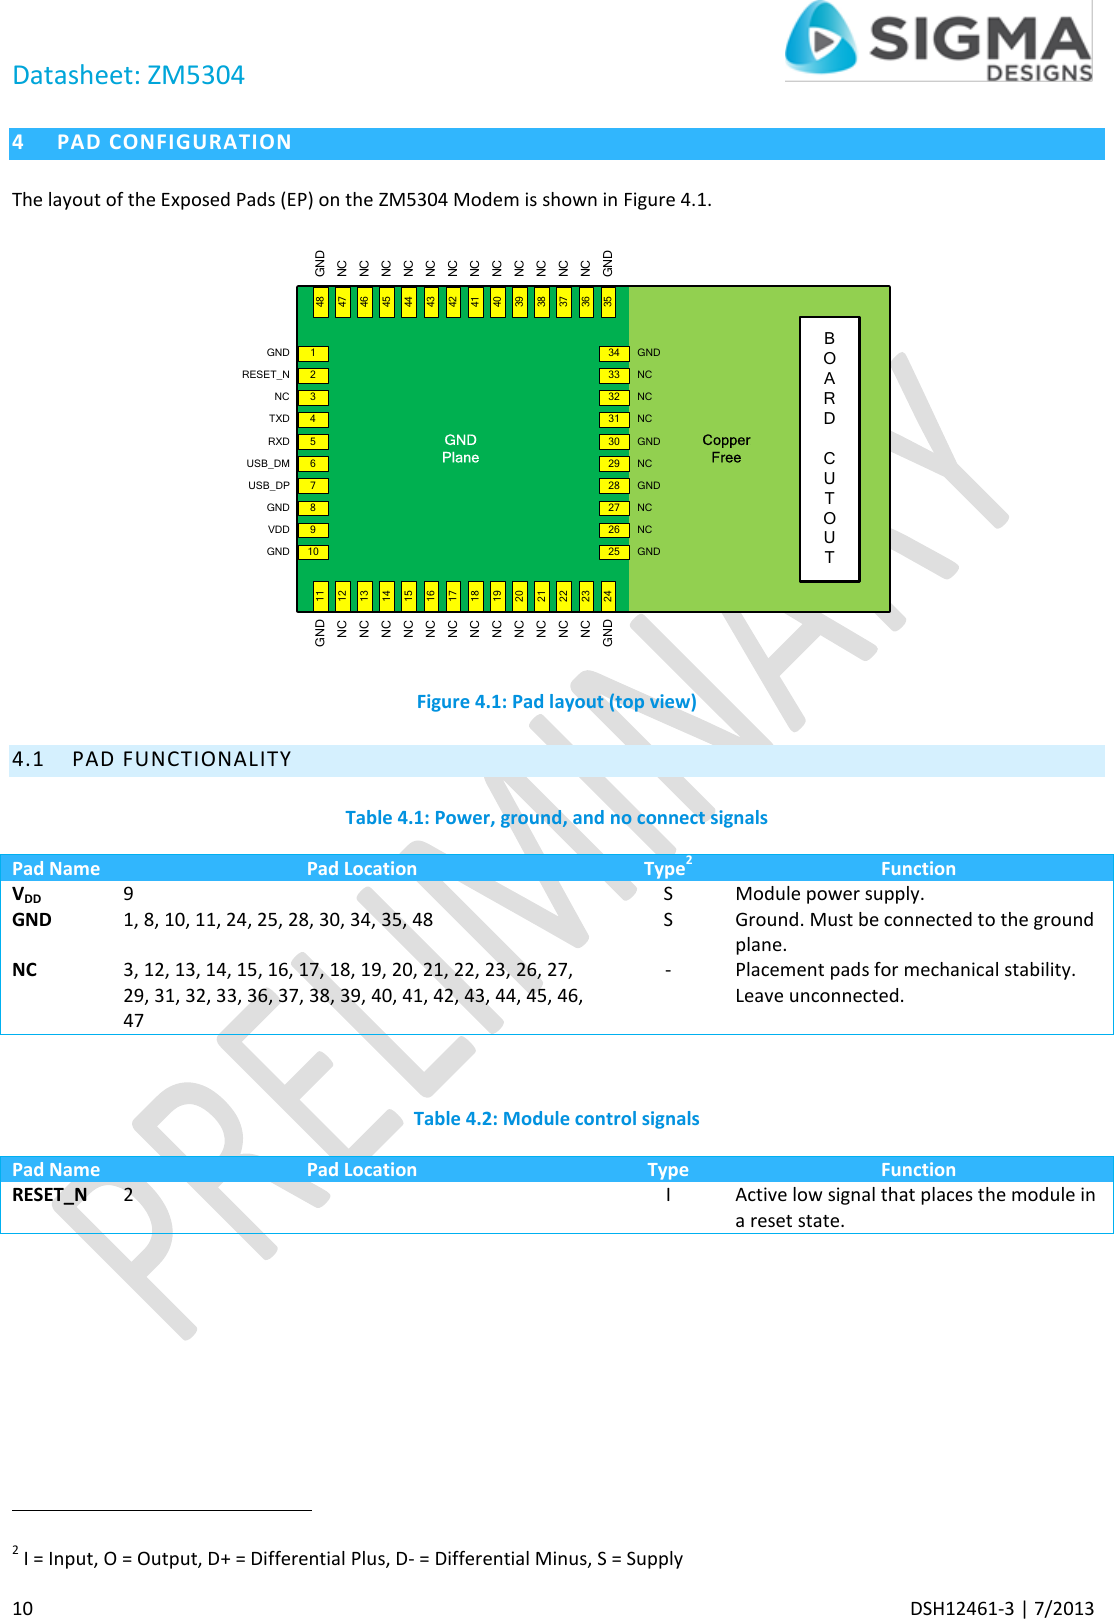 Datasheet: ZM5304     10    DSH12461-3 | 7/2013 4 PAD CONFIGURATION The layout of the Exposed Pads (EP) on the ZM5304 Modem is shown in Figure 4.1. 1098765432148474645444342414039383736351112131415161718192021222324BOARDCUTOUT25262728293031323334GNDVDDGNDUSB_DPUSB_DMRXDTXDNCRESET_NGNDGNDGNDGNDGNDNCNCNCNCGNDNCGNDGNDNCNCNCNCNCNCNCNCNCNCNCNCNCNCNCNCNCNCNCNCNCNCNCNCGND PlaneCopper FreeGNDNC Figure 4.1: Pad layout (top view) 4.1 PAD FUNCTIONALITY Table 4.1: Power, ground, and no connect signals Pad Name Pad Location Type2 Function VDD 9 S Module power supply. GND 1, 8, 10, 11, 24, 25, 28, 30, 34, 35, 48 S Ground. Must be connected to the ground plane. NC 3, 12, 13, 14, 15, 16, 17, 18, 19, 20, 21, 22, 23, 26, 27, 29, 31, 32, 33, 36, 37, 38, 39, 40, 41, 42, 43, 44, 45, 46, 47 - Placement pads for mechanical stability. Leave unconnected.  Table 4.2: Module control signals Pad Name Pad Location Type Function RESET_N 2 I Active low signal that places the module in a reset state.                                                                   2 I = Input, O = Output, D+ = Differential Plus, D- = Differential Minus, S = Supply 